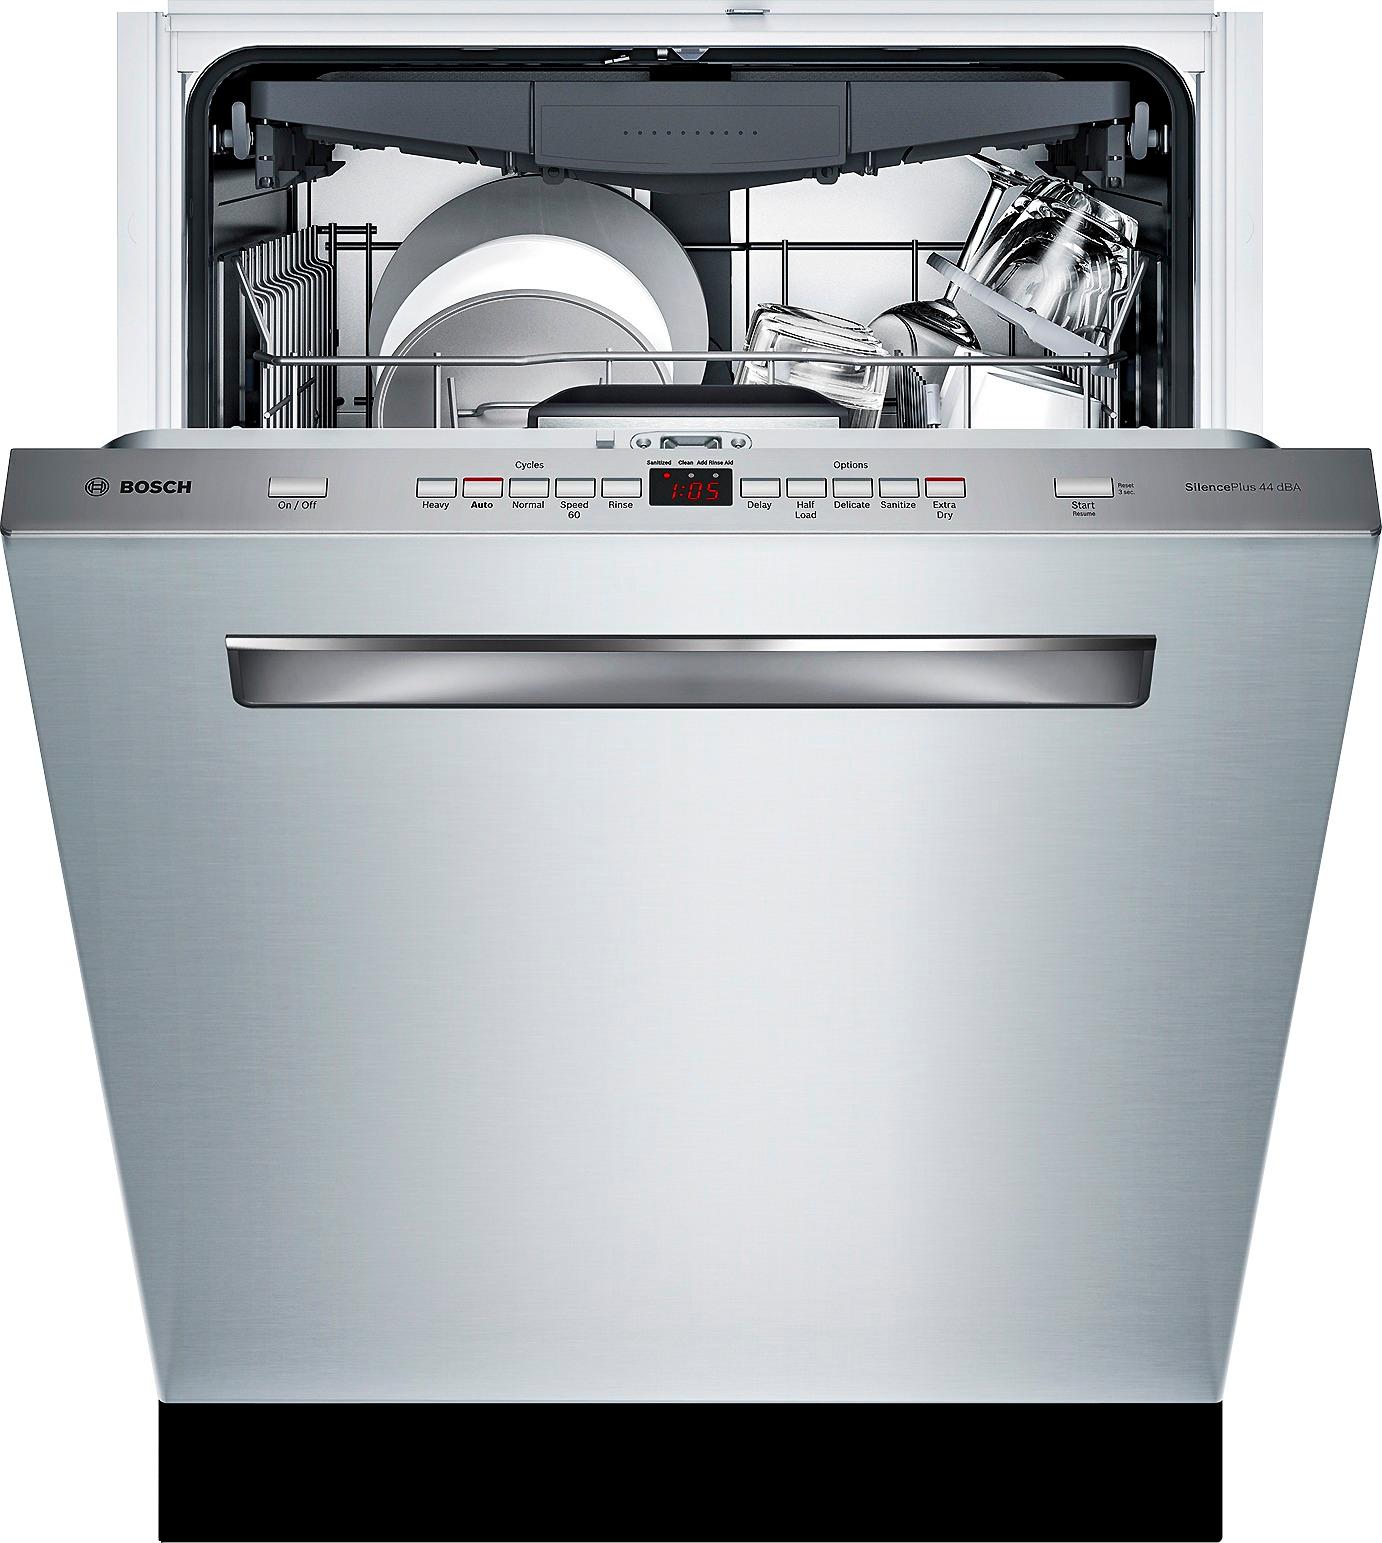 Best Buy Bosch 500 Series 24" Pocket Handle Dishwasher with Stainless